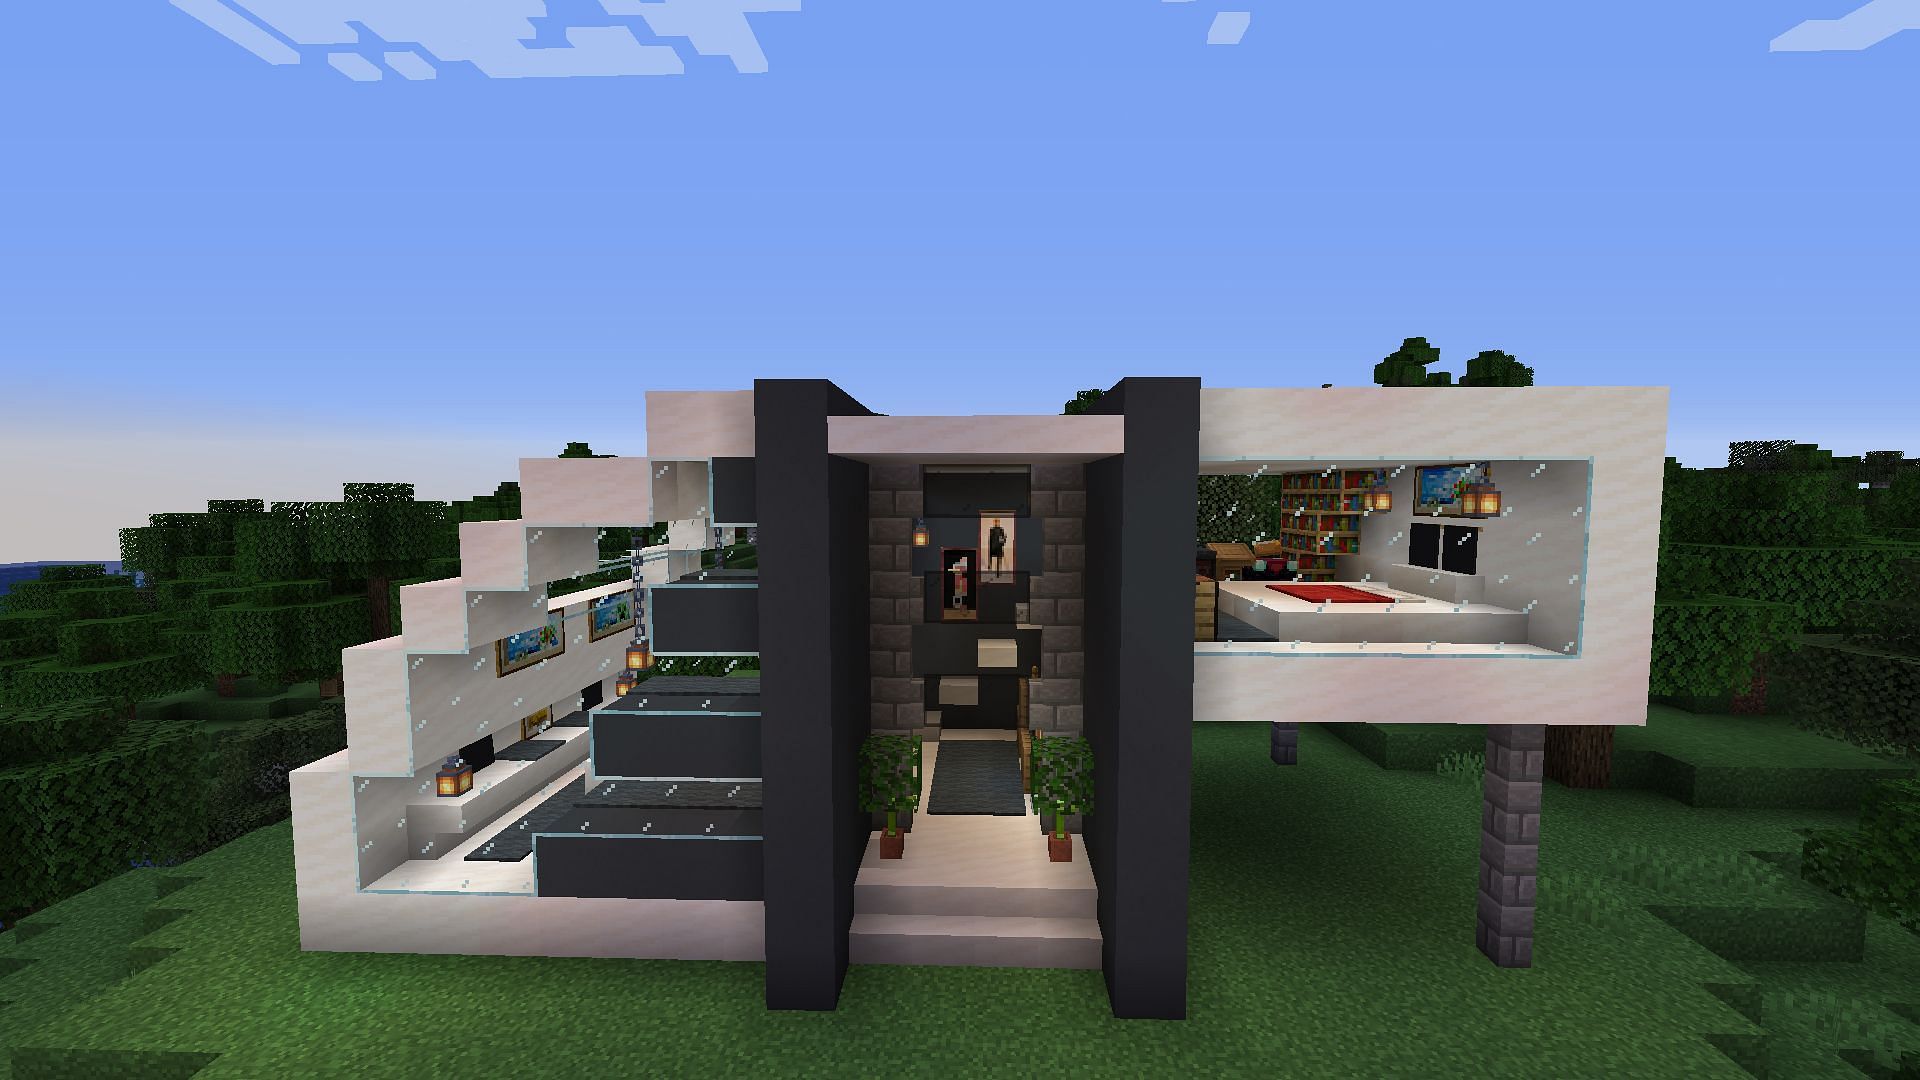 Modern houses come in many shapes and sizes in Minecraft (Image via KyloMCraft/YouTube)